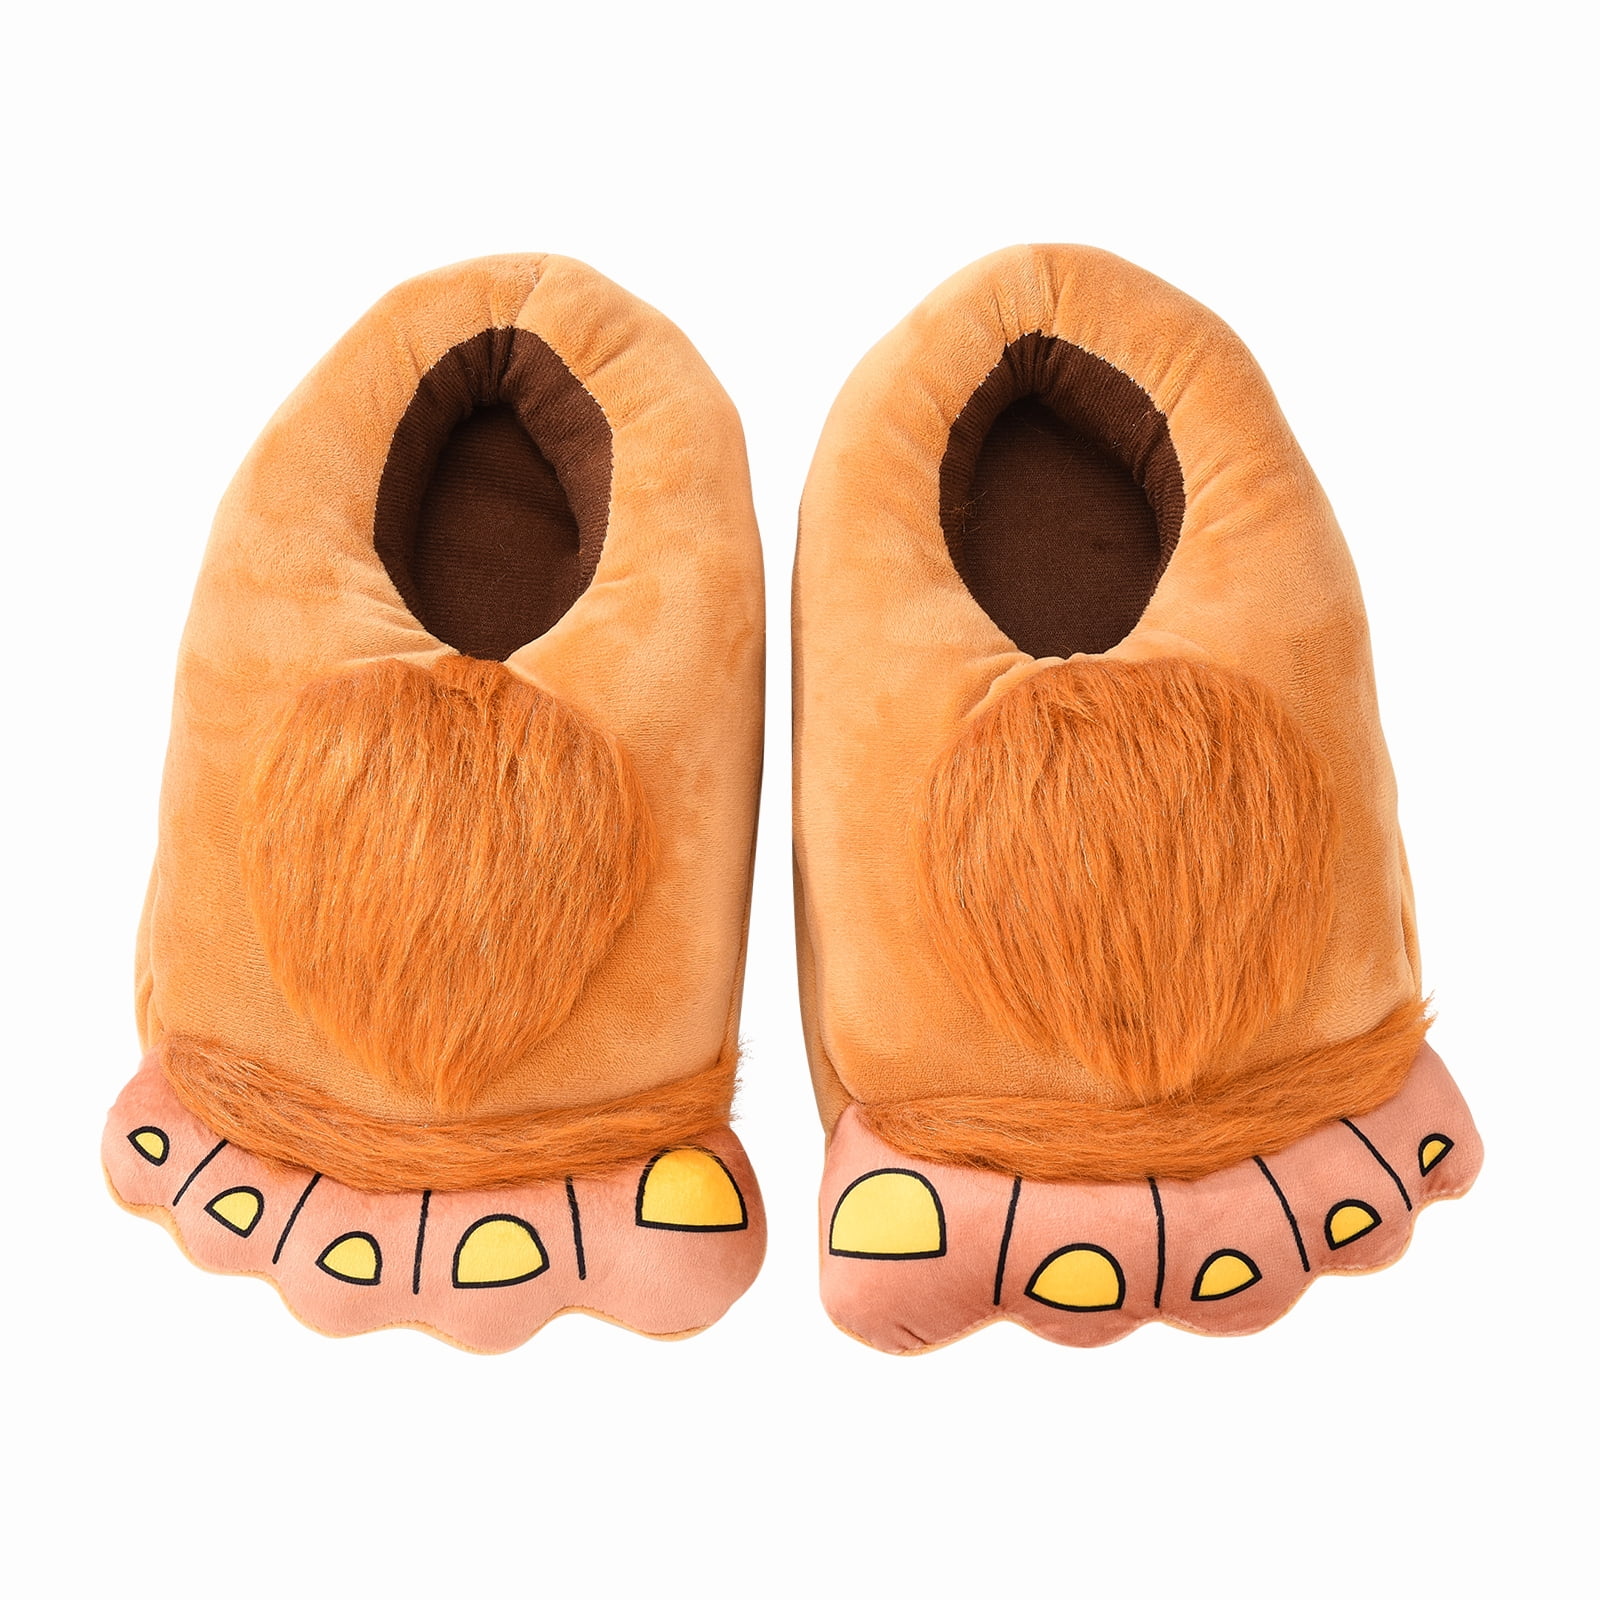 CreativeArrowy Furry Monster Adventure Slippers Comfortable Novelty Warm Winter Hobbit Feet Slippers for Boys Girls Suitable for Women Size 5 5 9 5 a8925843 b89f 49e8 9a2a 7f0d499750a6.f5fc6b155f31ac81eface93b6120a63c